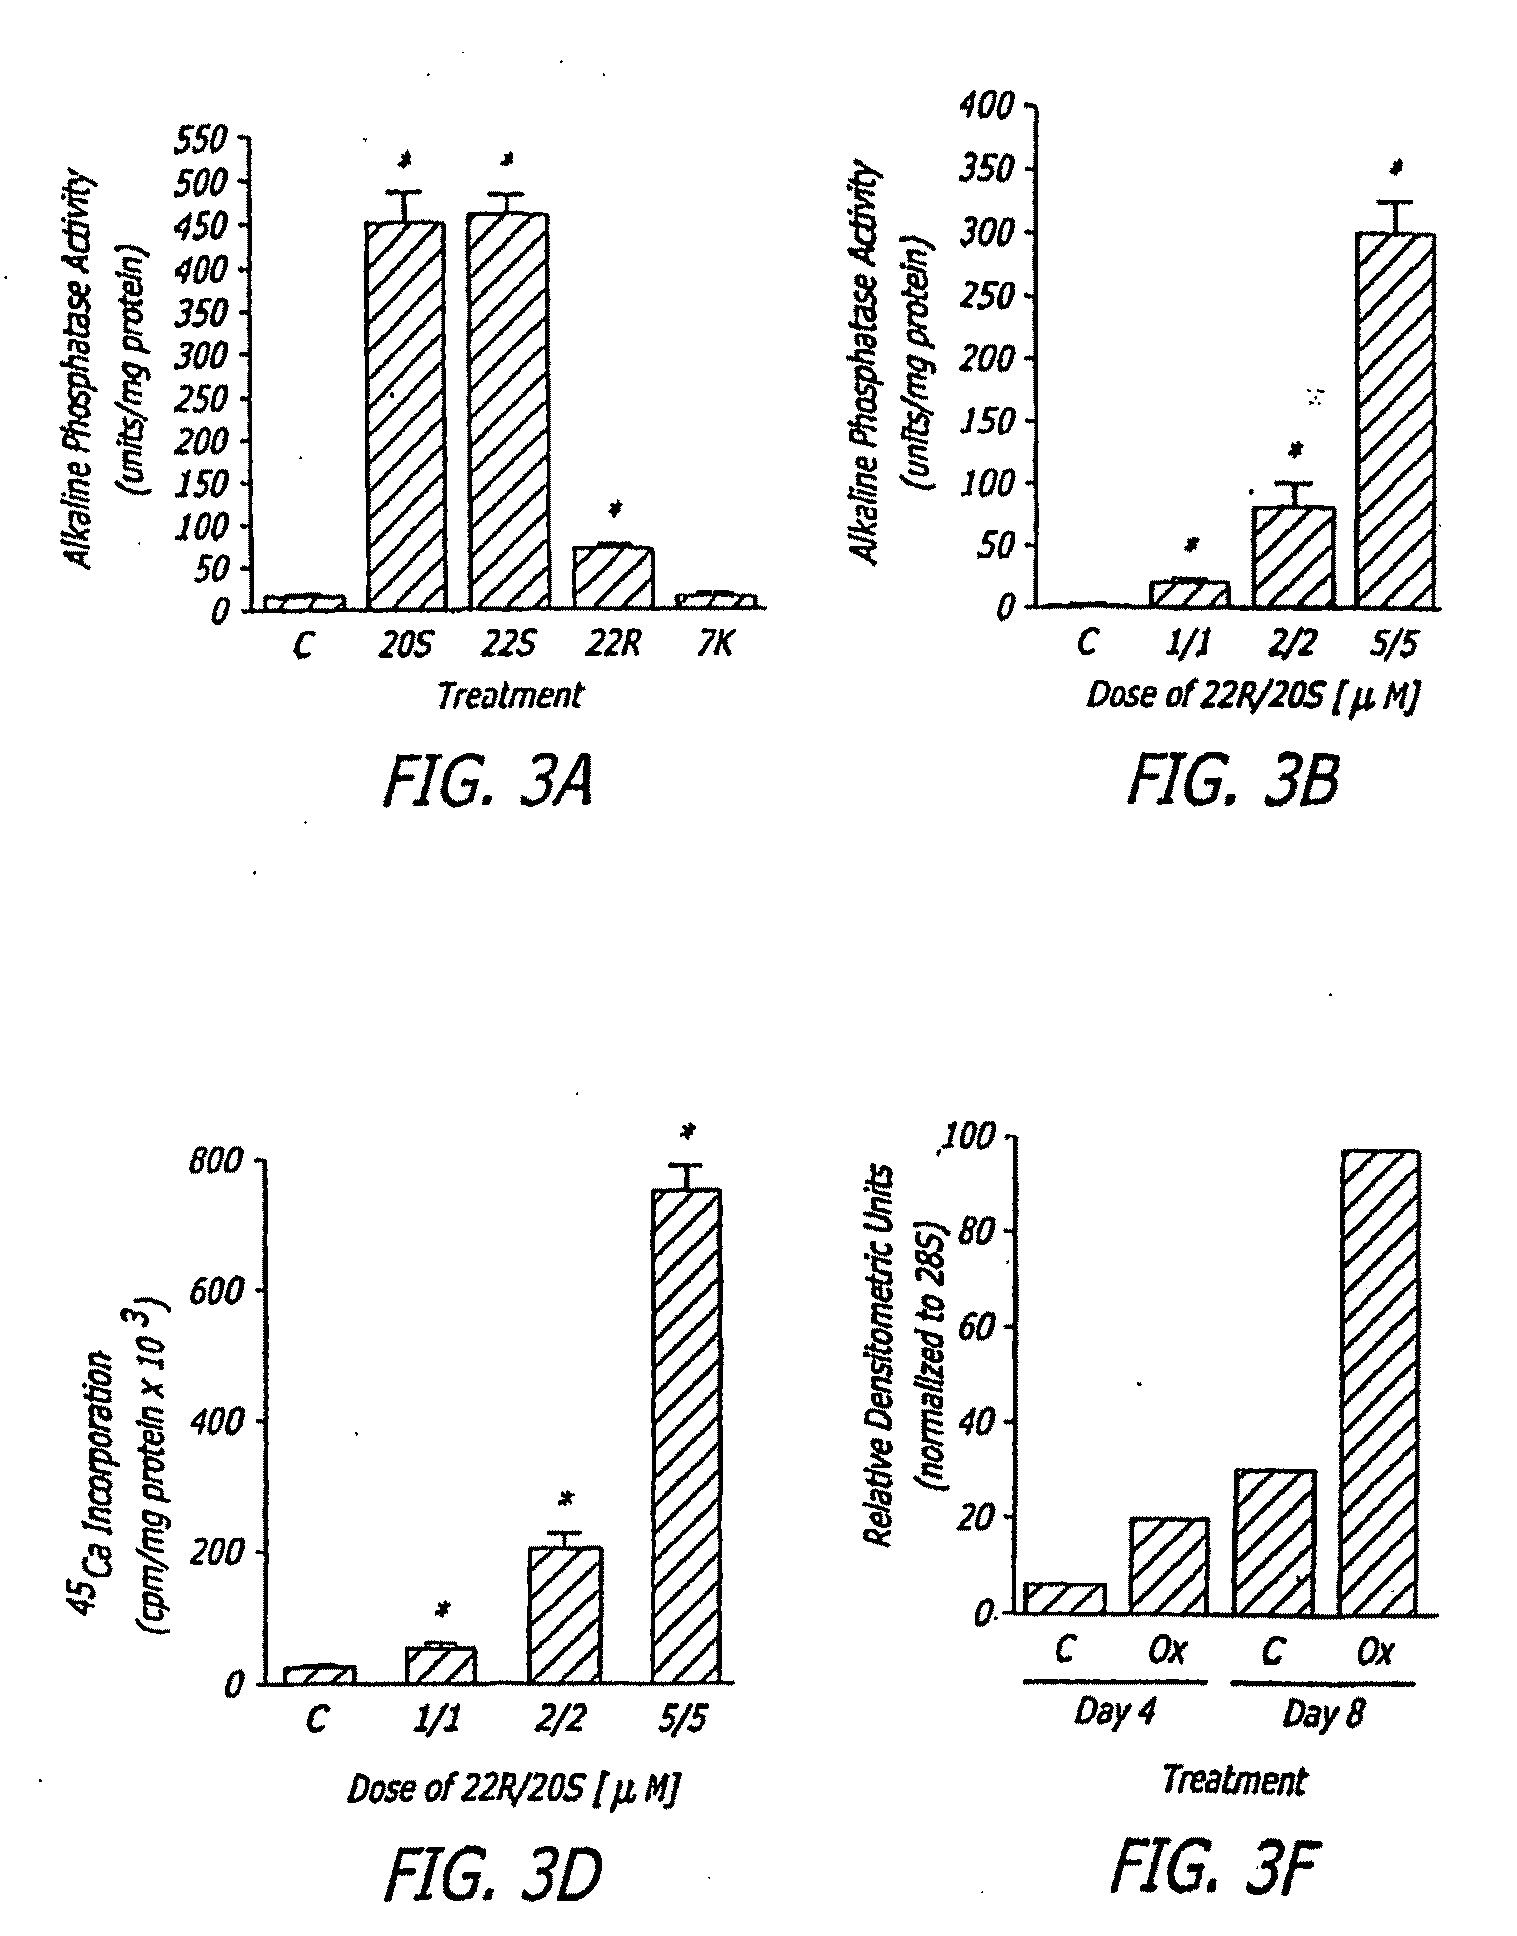 Agents and Methods for Osteogenic Oxysterols Inhibition of Oxidative Stress on Osteogenic Cellular Differentiation